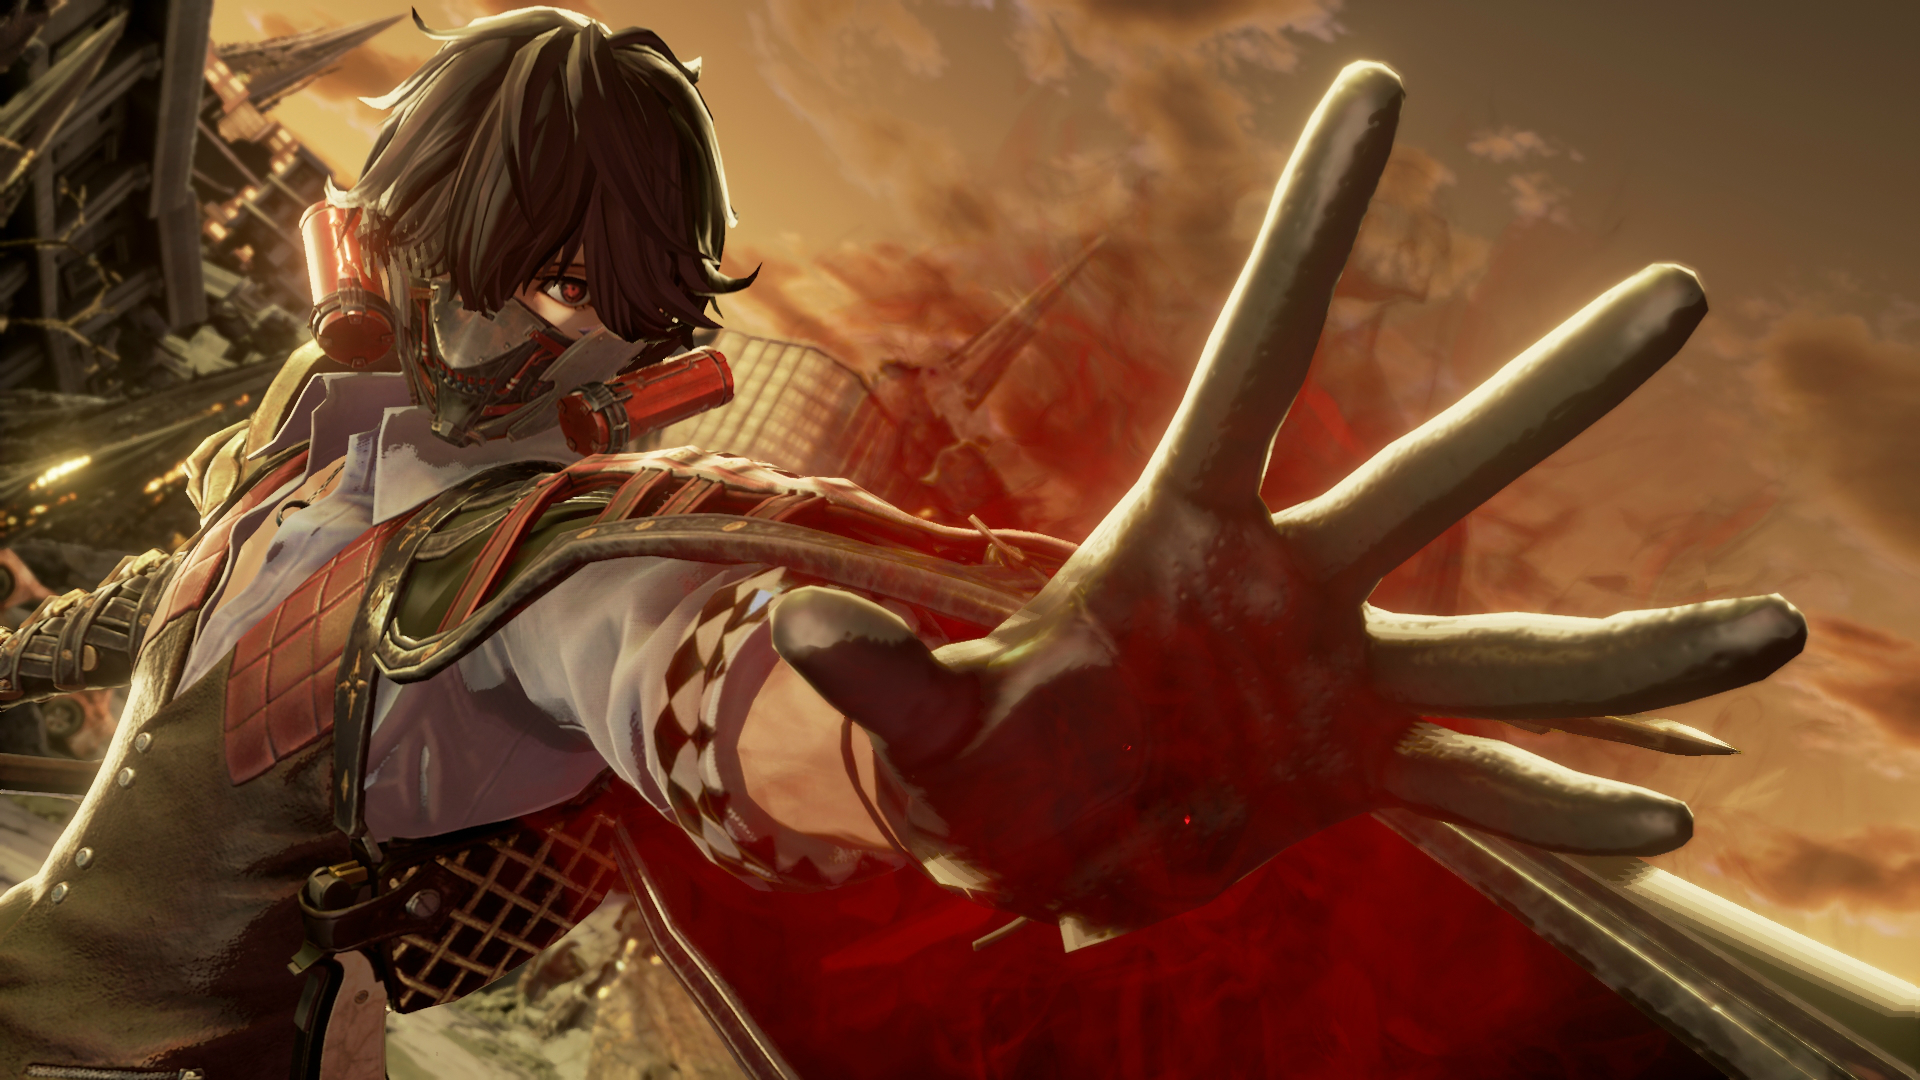 Code Vein: What the Anime Aesthetic Adds to the Game